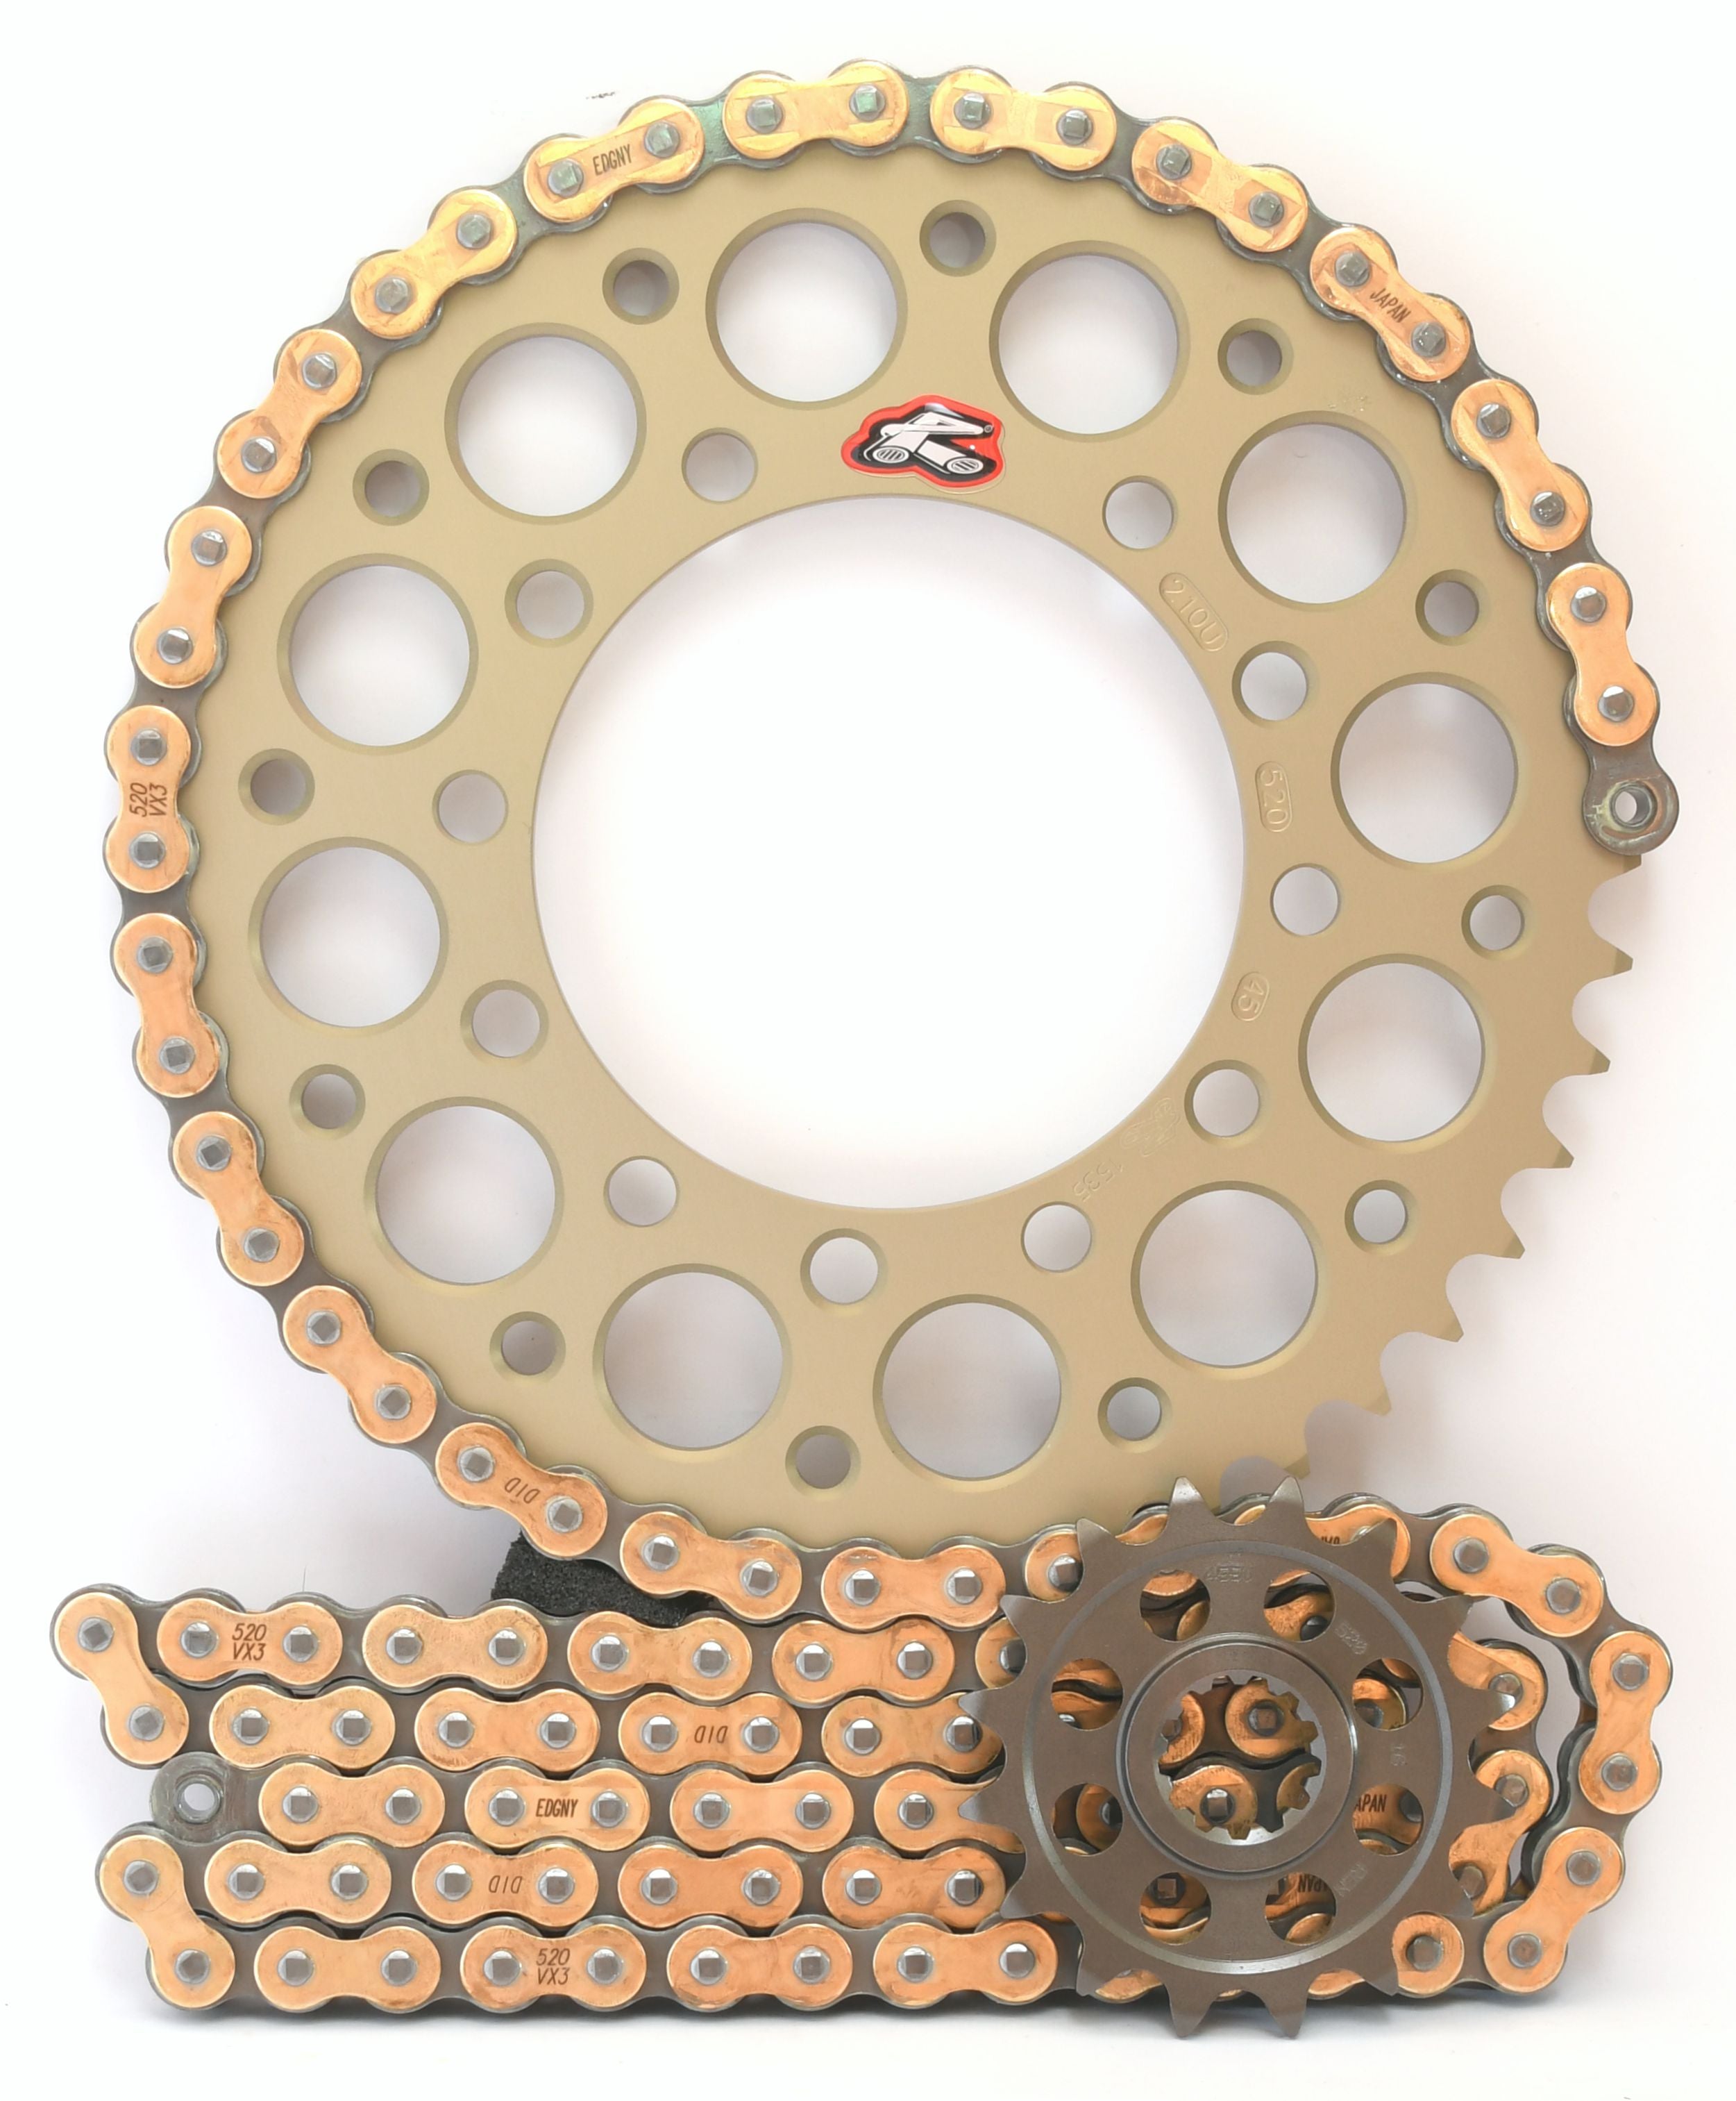 Renthal Ultralight and DID 520 Conversion Chain & Sprocket Kit for Suzuki GSX-R1000 2009-2016 - Standard Gearing